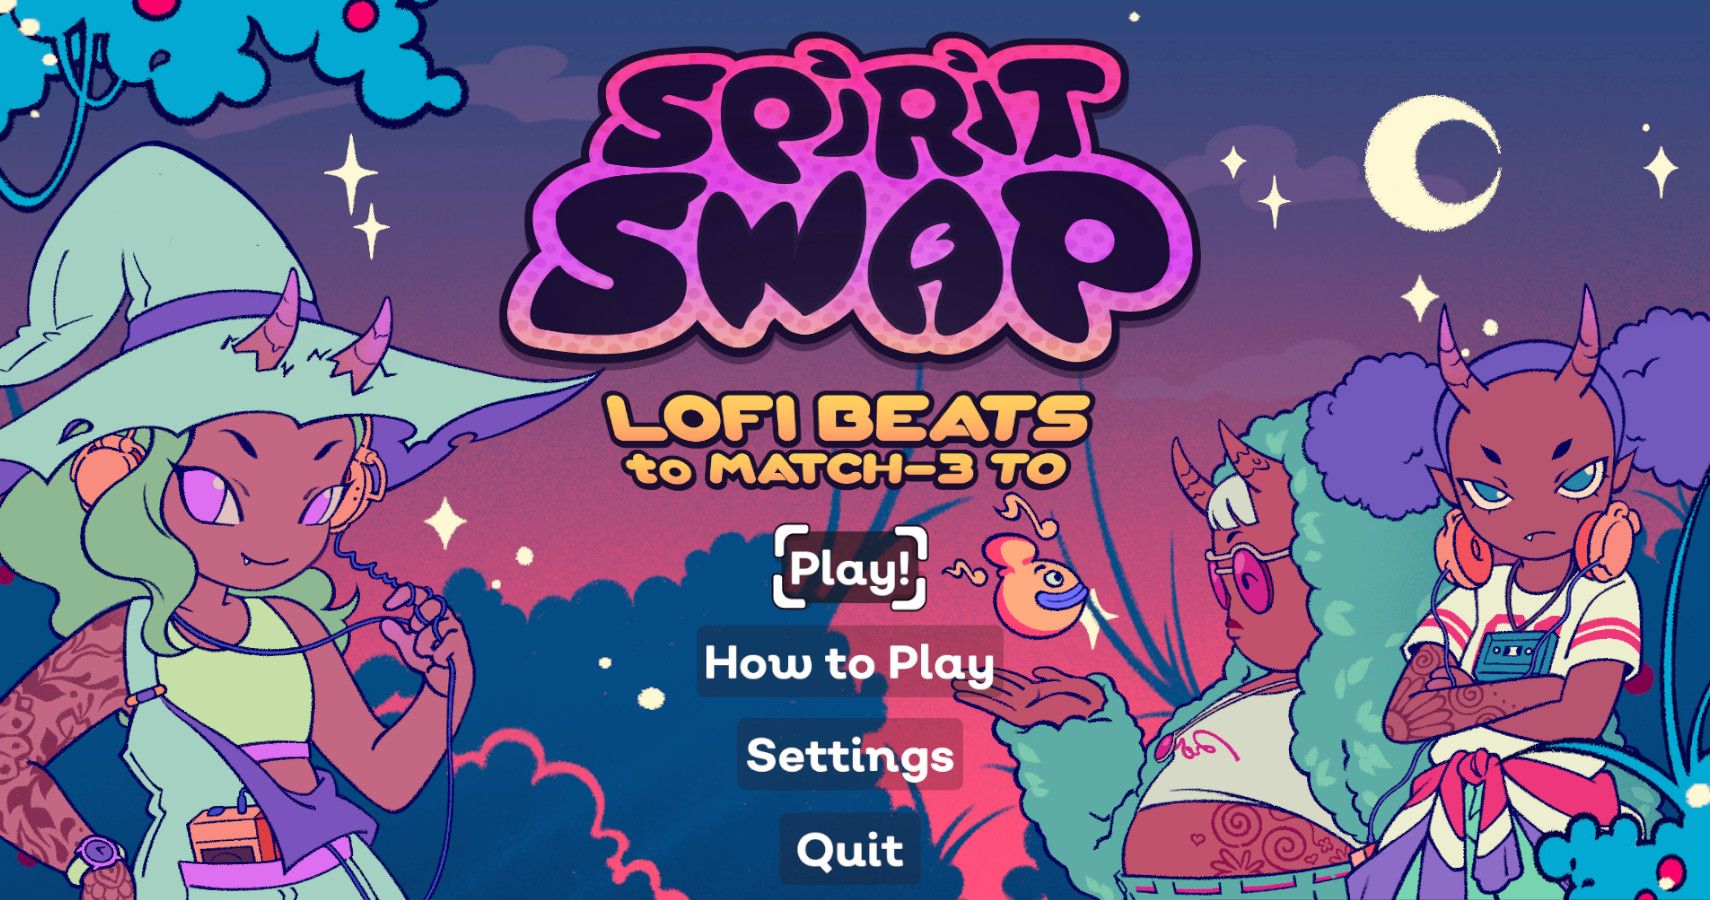 the title page from the spirit swap demo